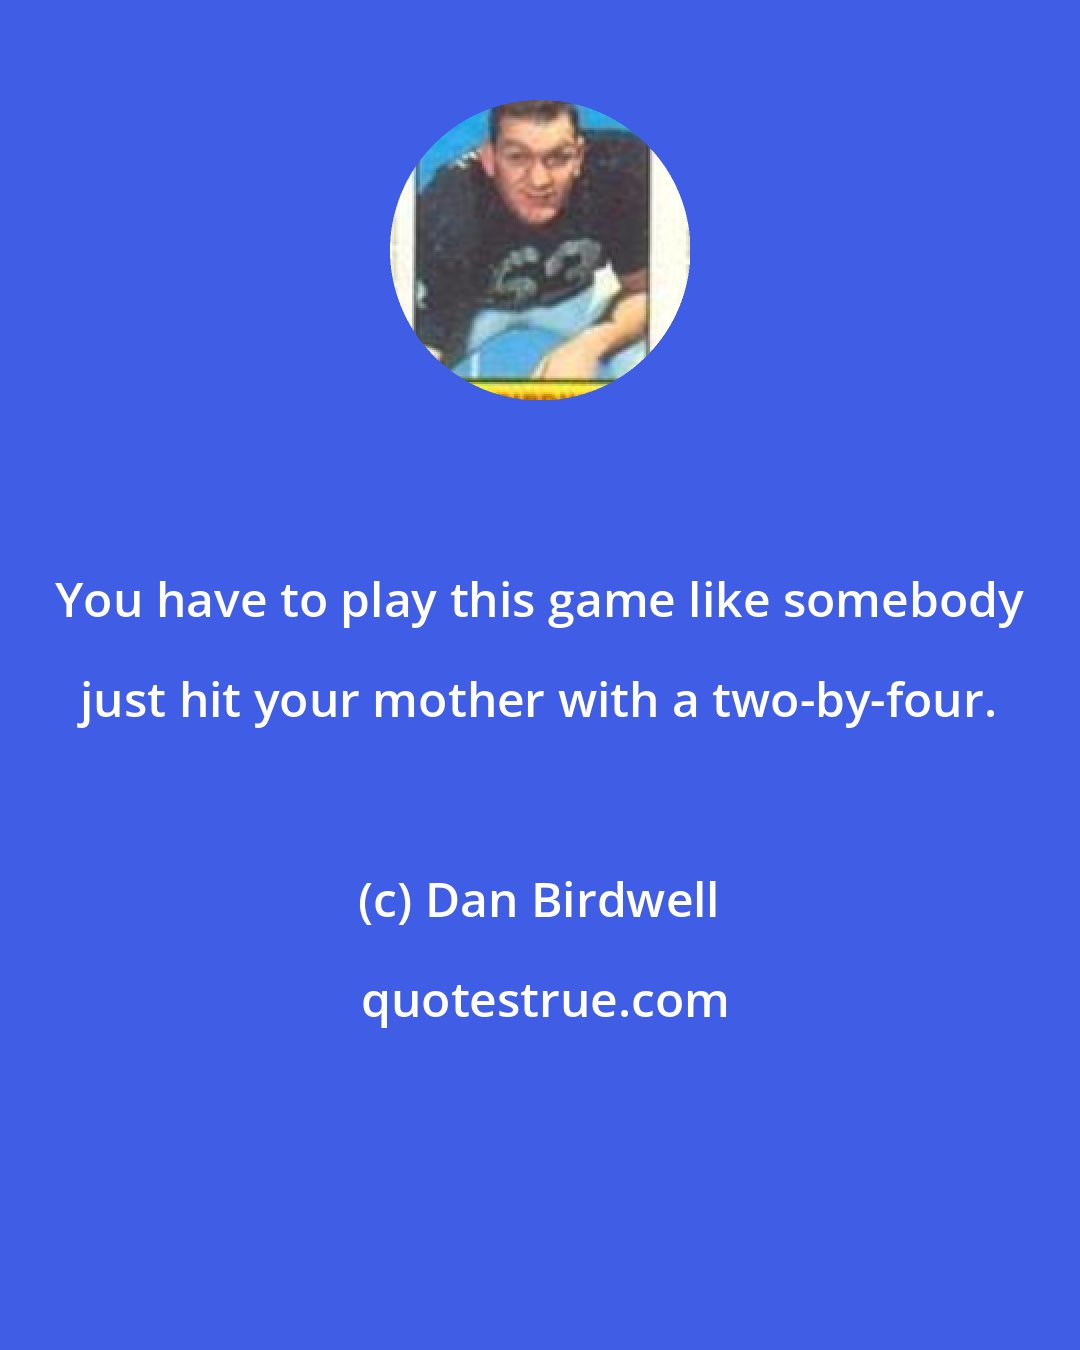 Dan Birdwell: You have to play this game like somebody just hit your mother with a two-by-four.